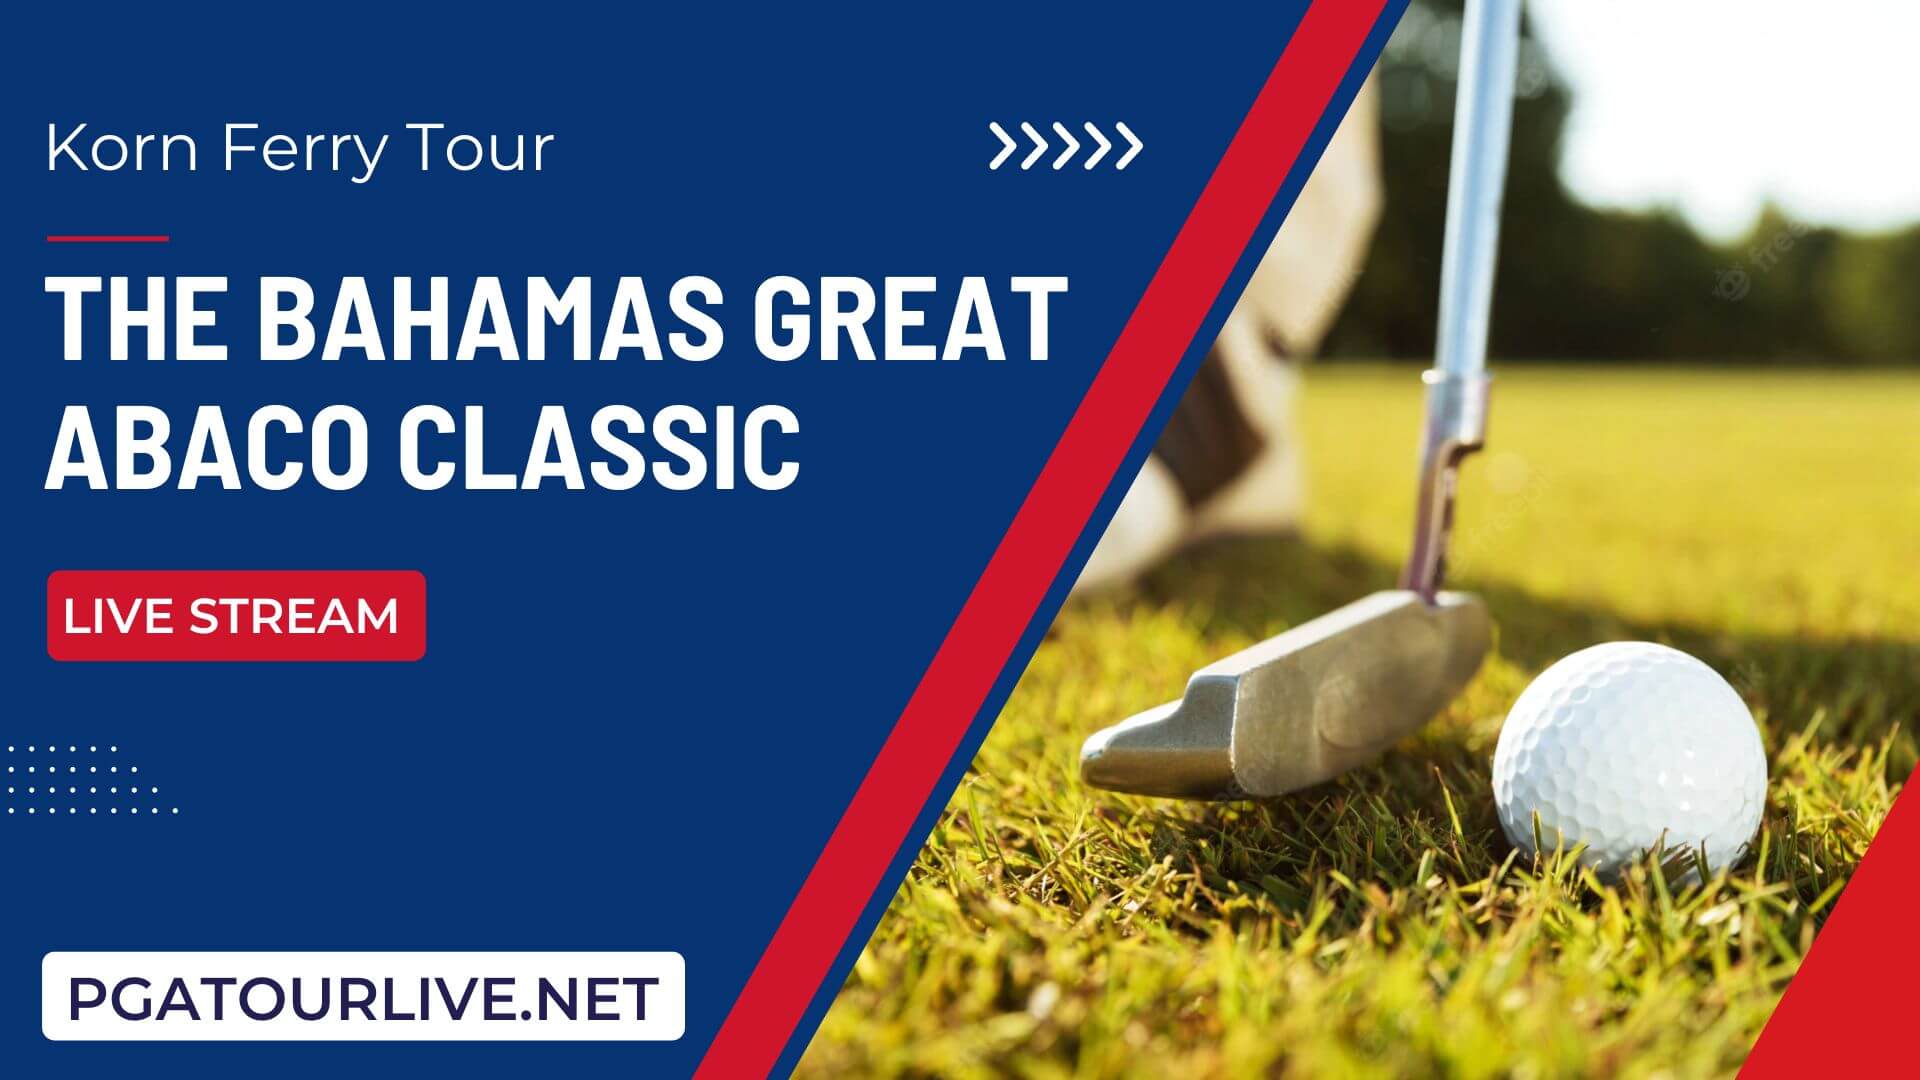 The Bahamas Great Abaco Classic Live Stream Korn Ferry Tour